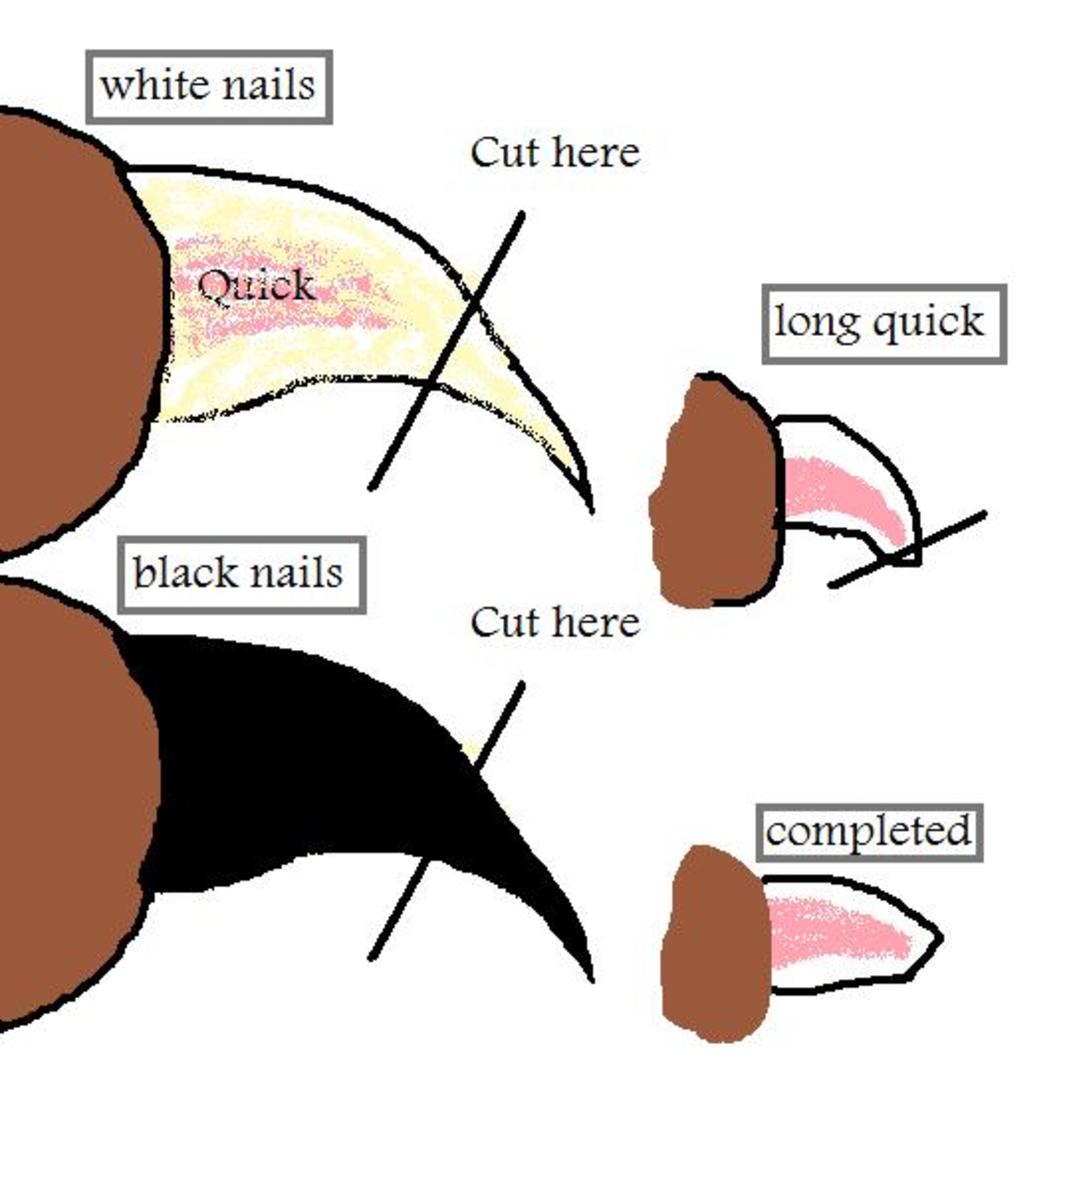 How To Safely Trim Your Dog's Black Nails - My Brown Newfies